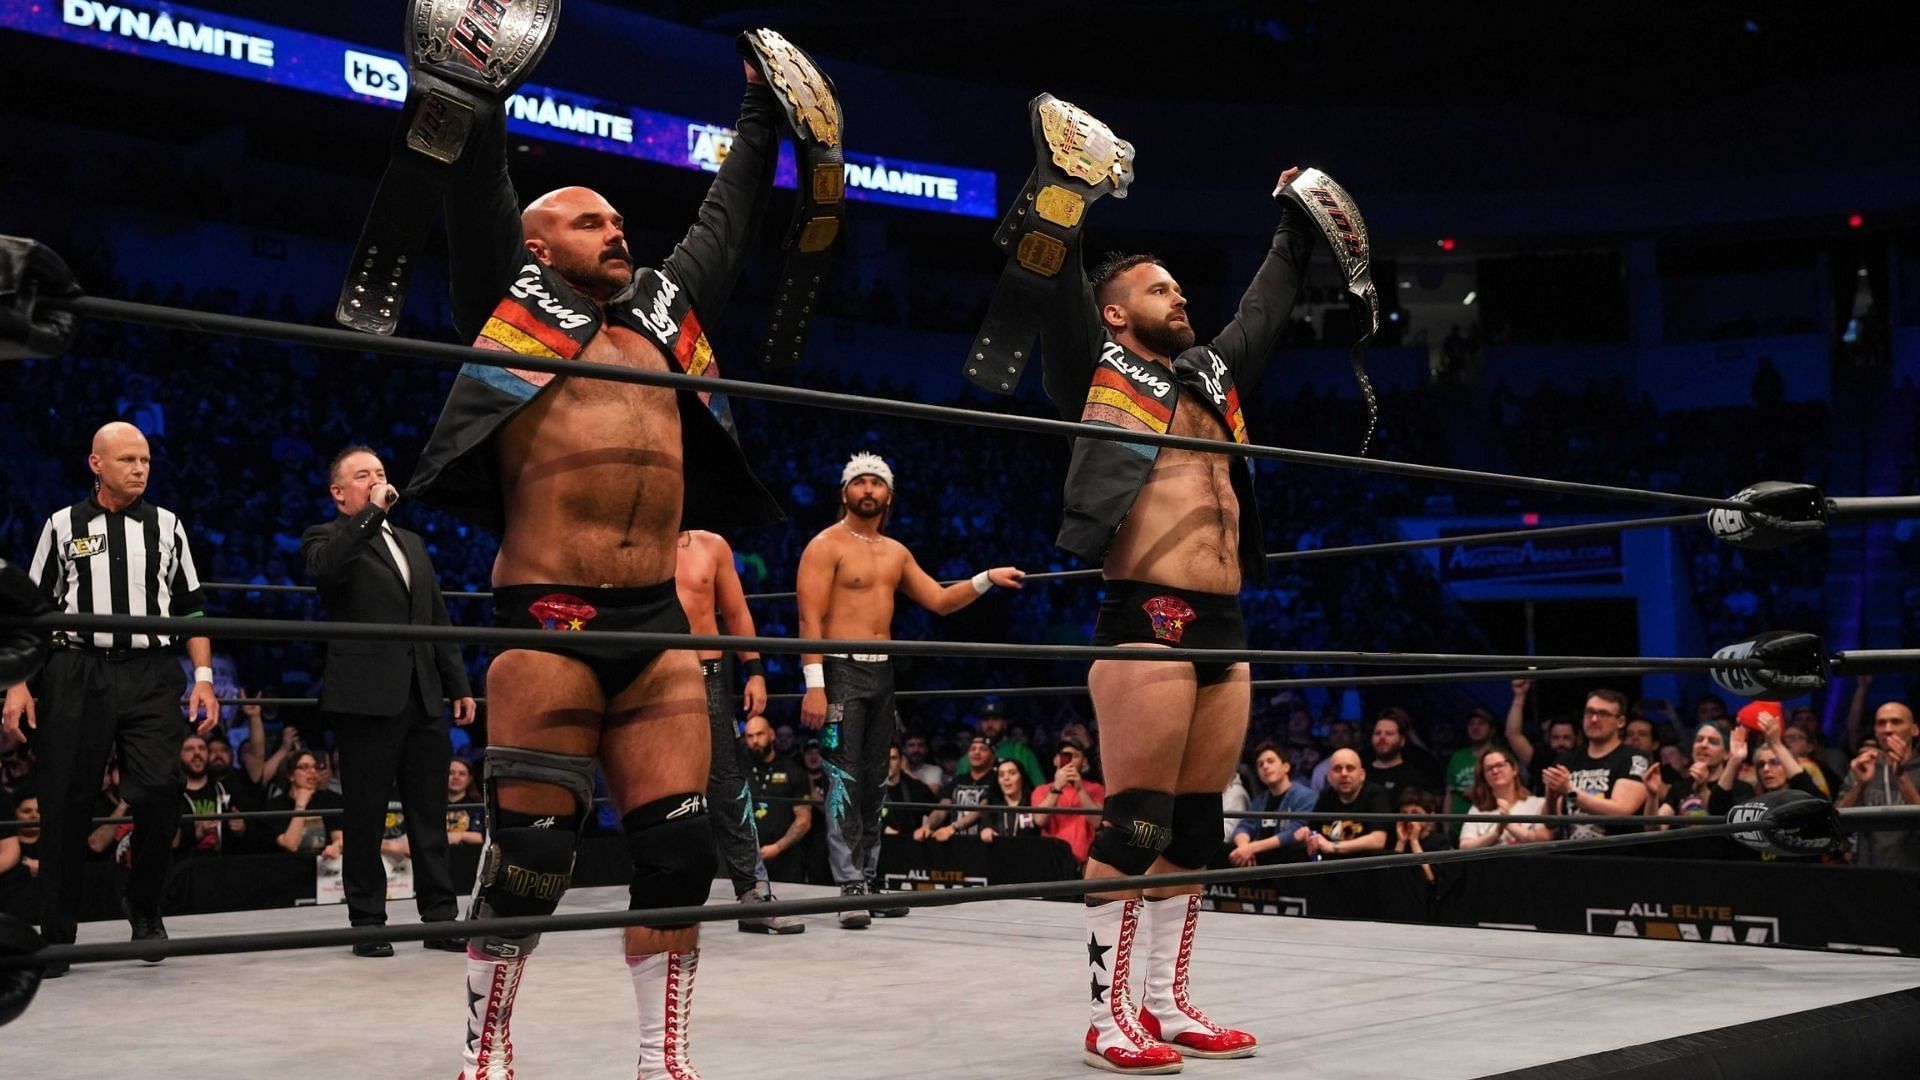 FTR reign as both ROH and AAA Tag Team Champs